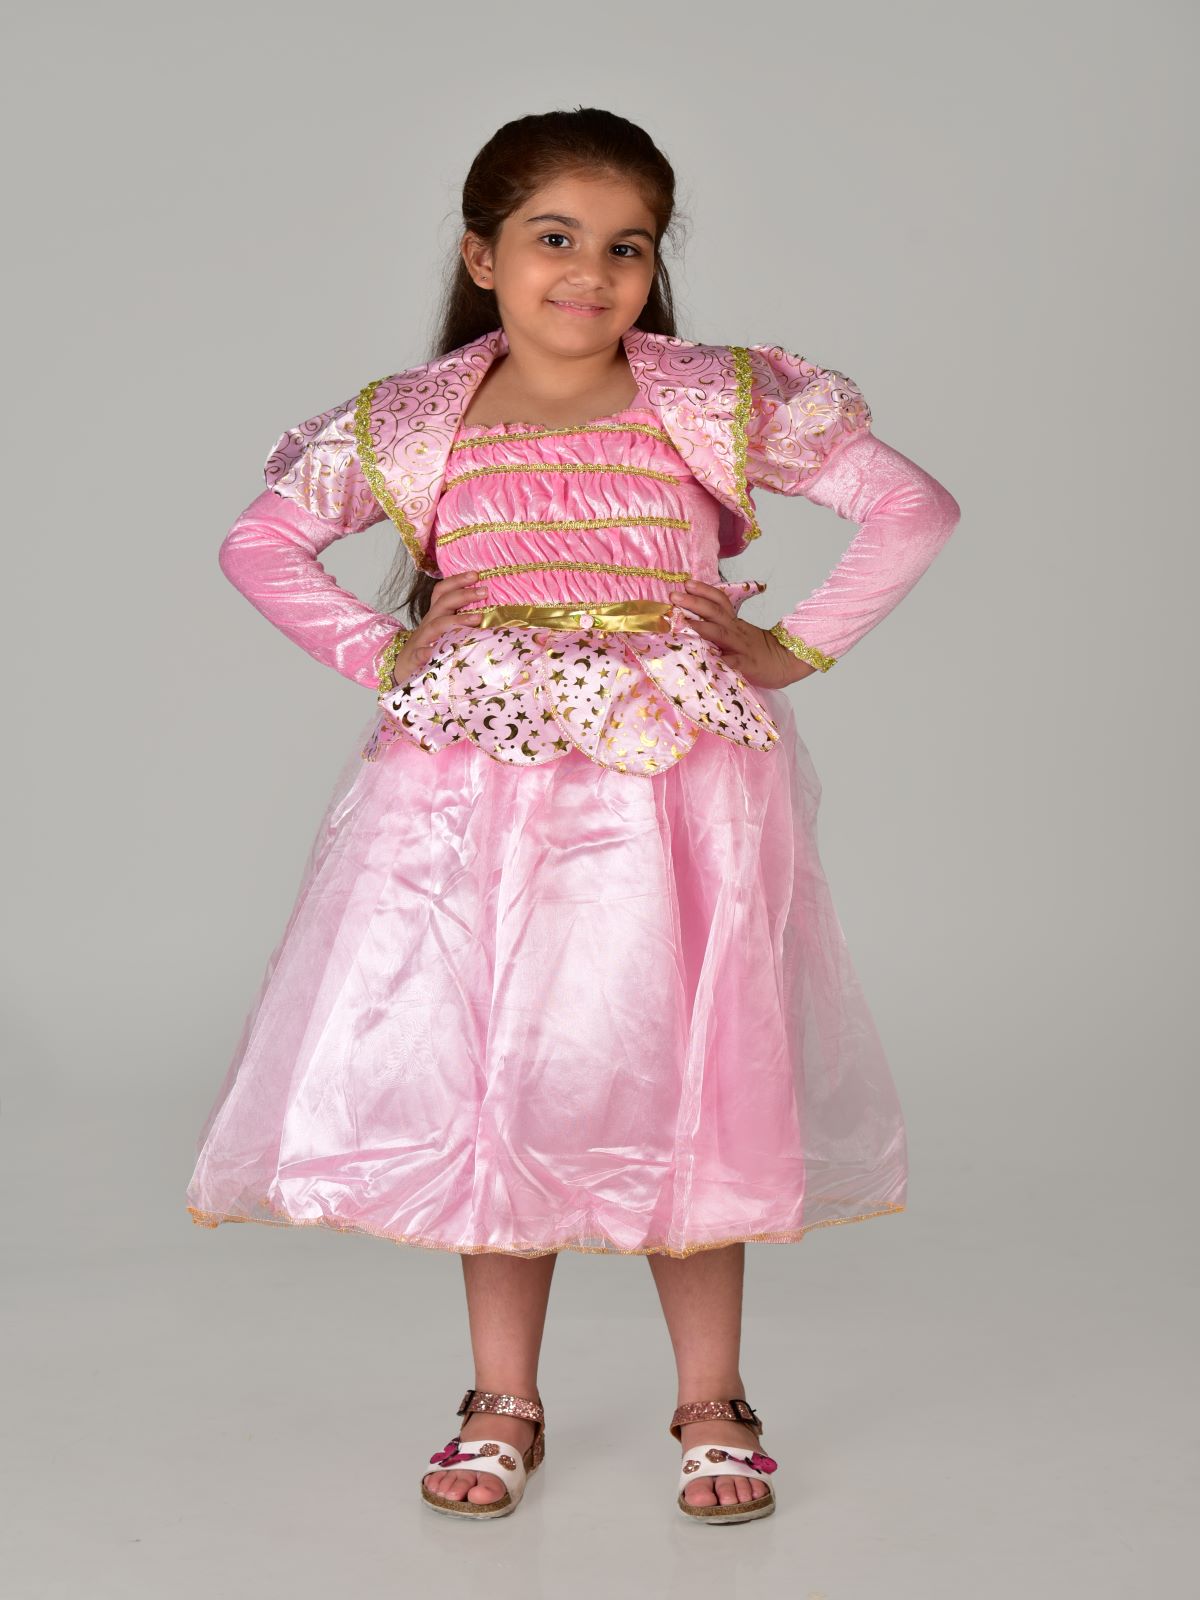 Childs PRETTY PRINCESS Pink Fancy Dress Medieval Costume Girls Outfit Ages  3 -10 | eBay